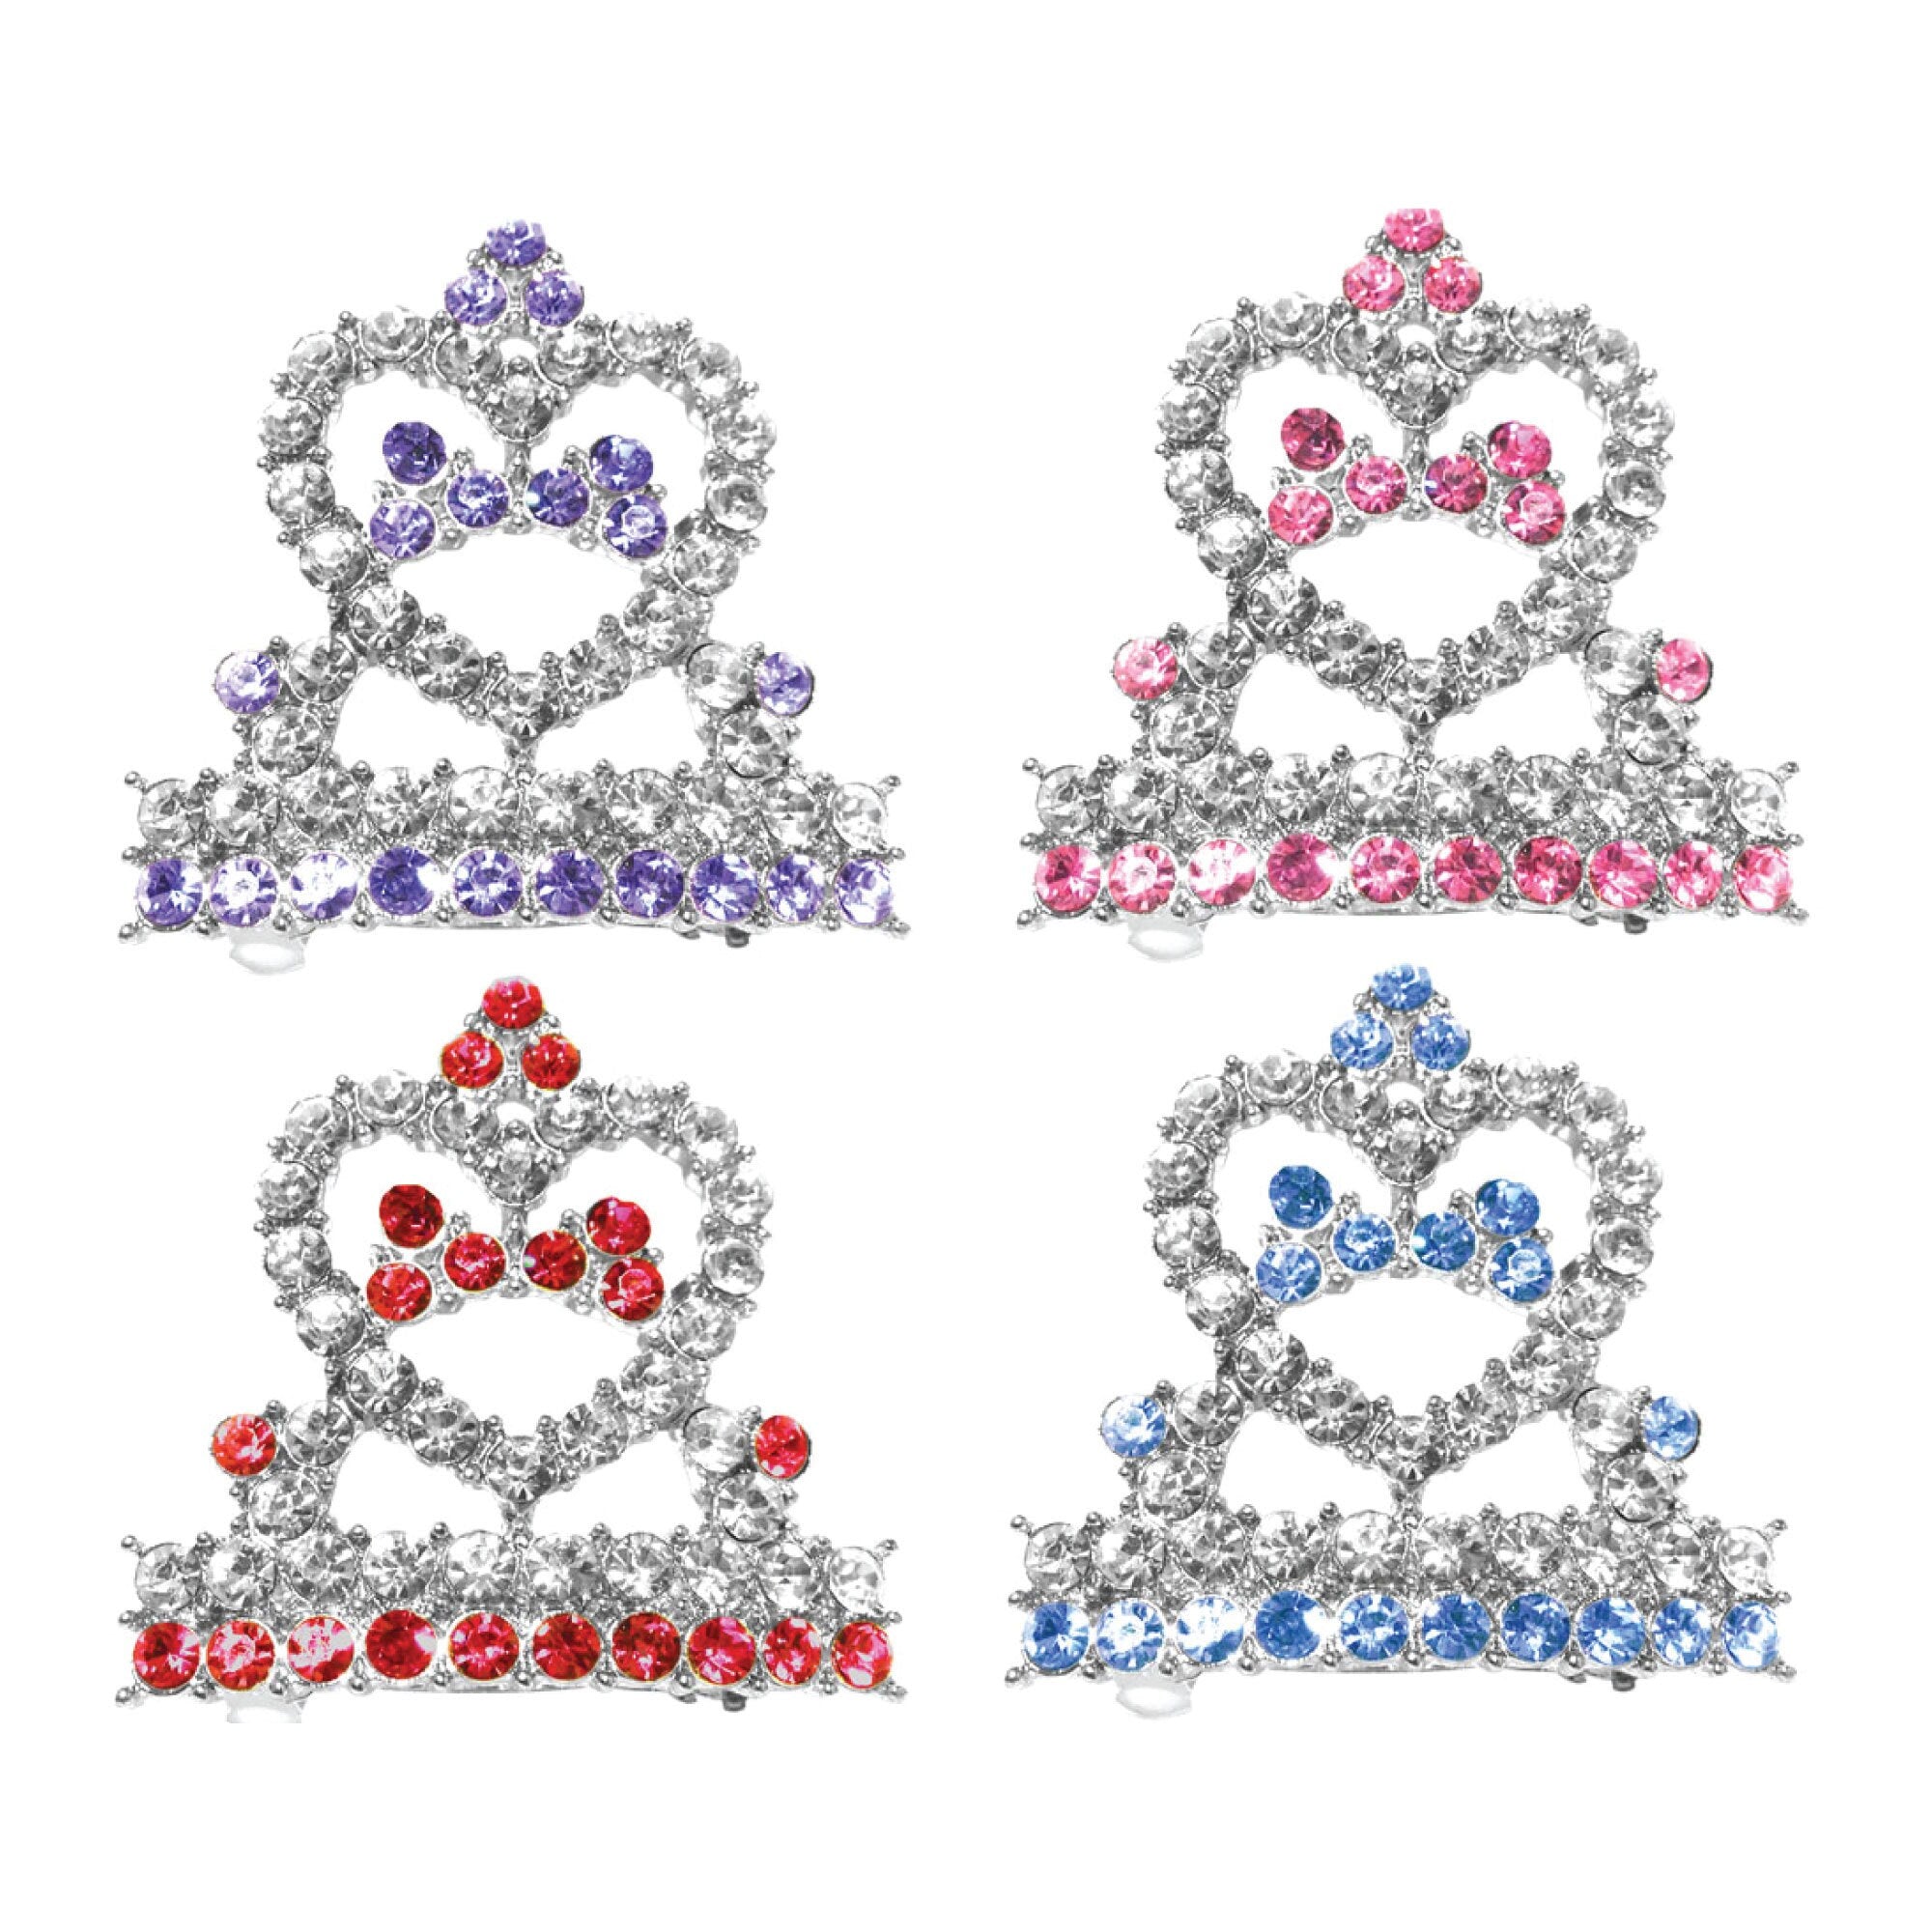 Dog, Puppy & Pet Clip On Grooming Accessory, "Tiara Barrette" (Available in 4 different colors!)